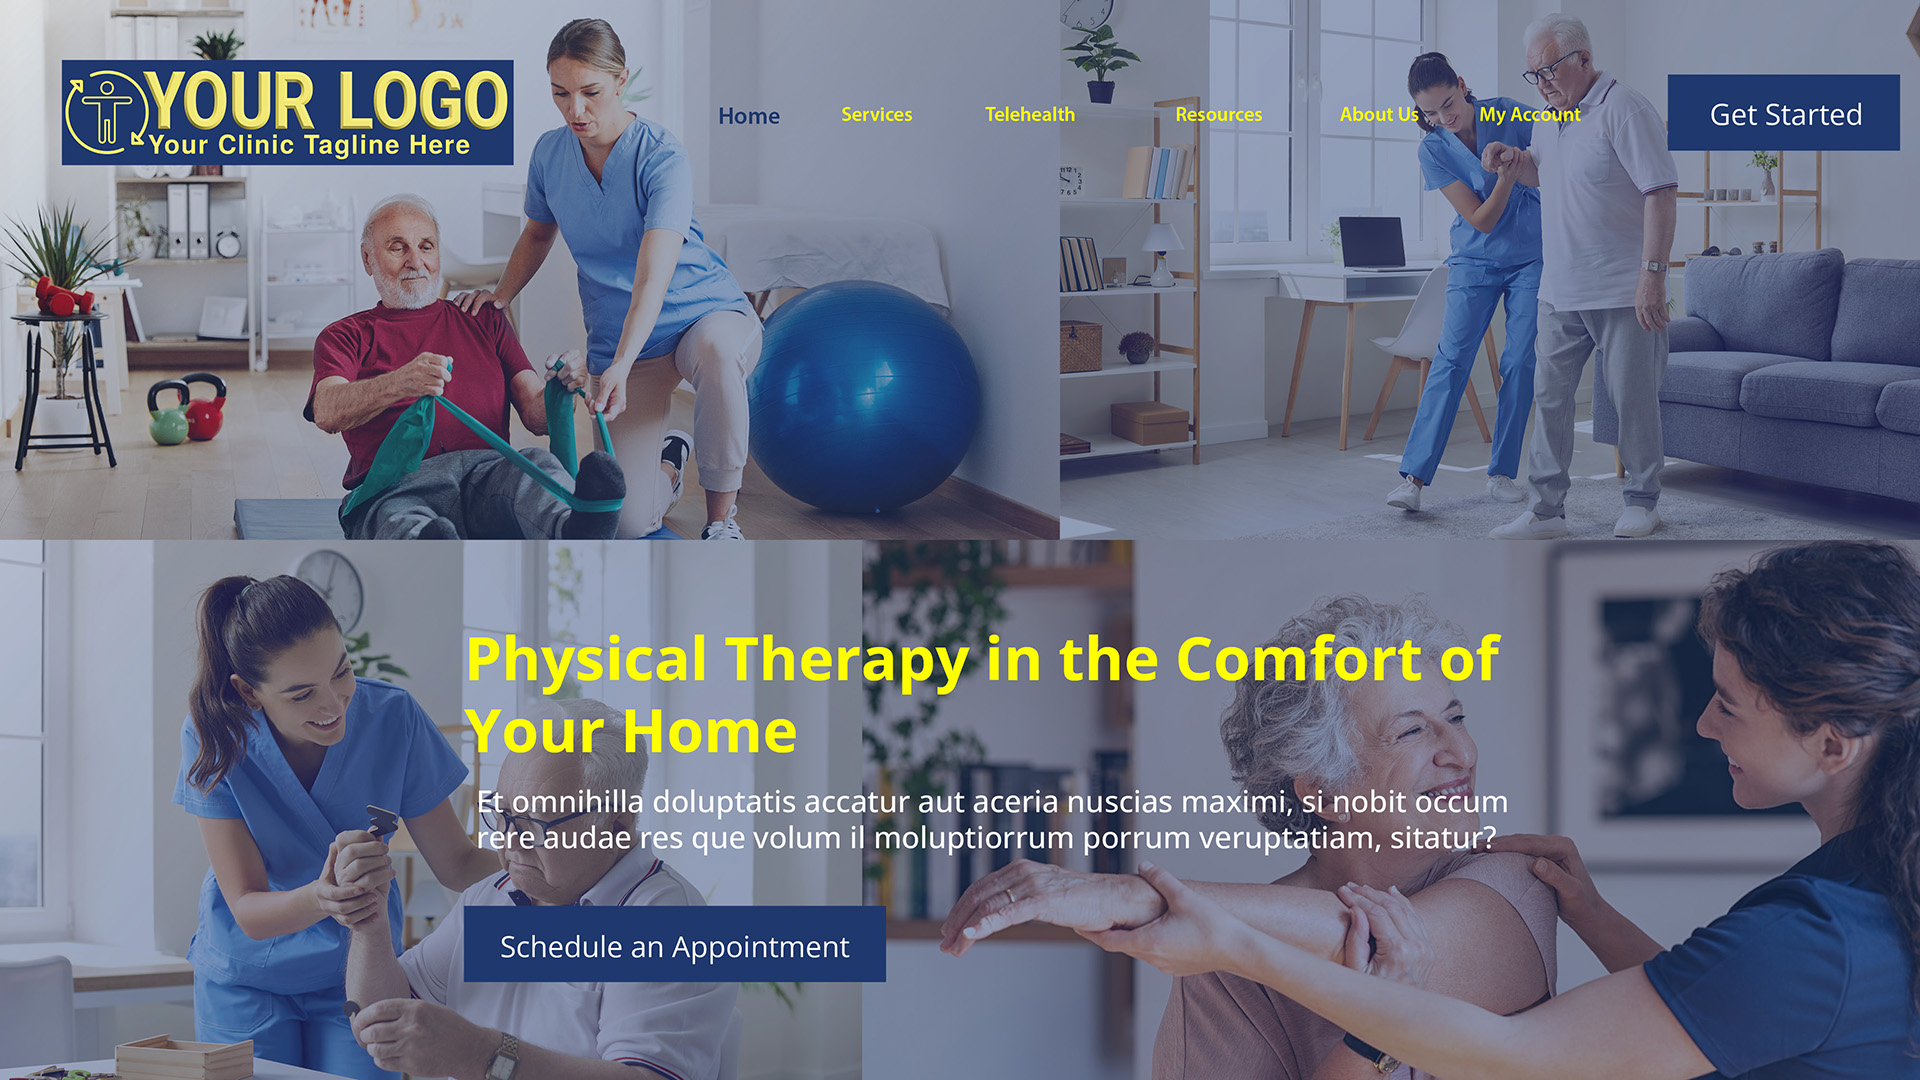 Custom Physical Therapy Website design sample for Mobile Physical Therapy | PT Referral Machine